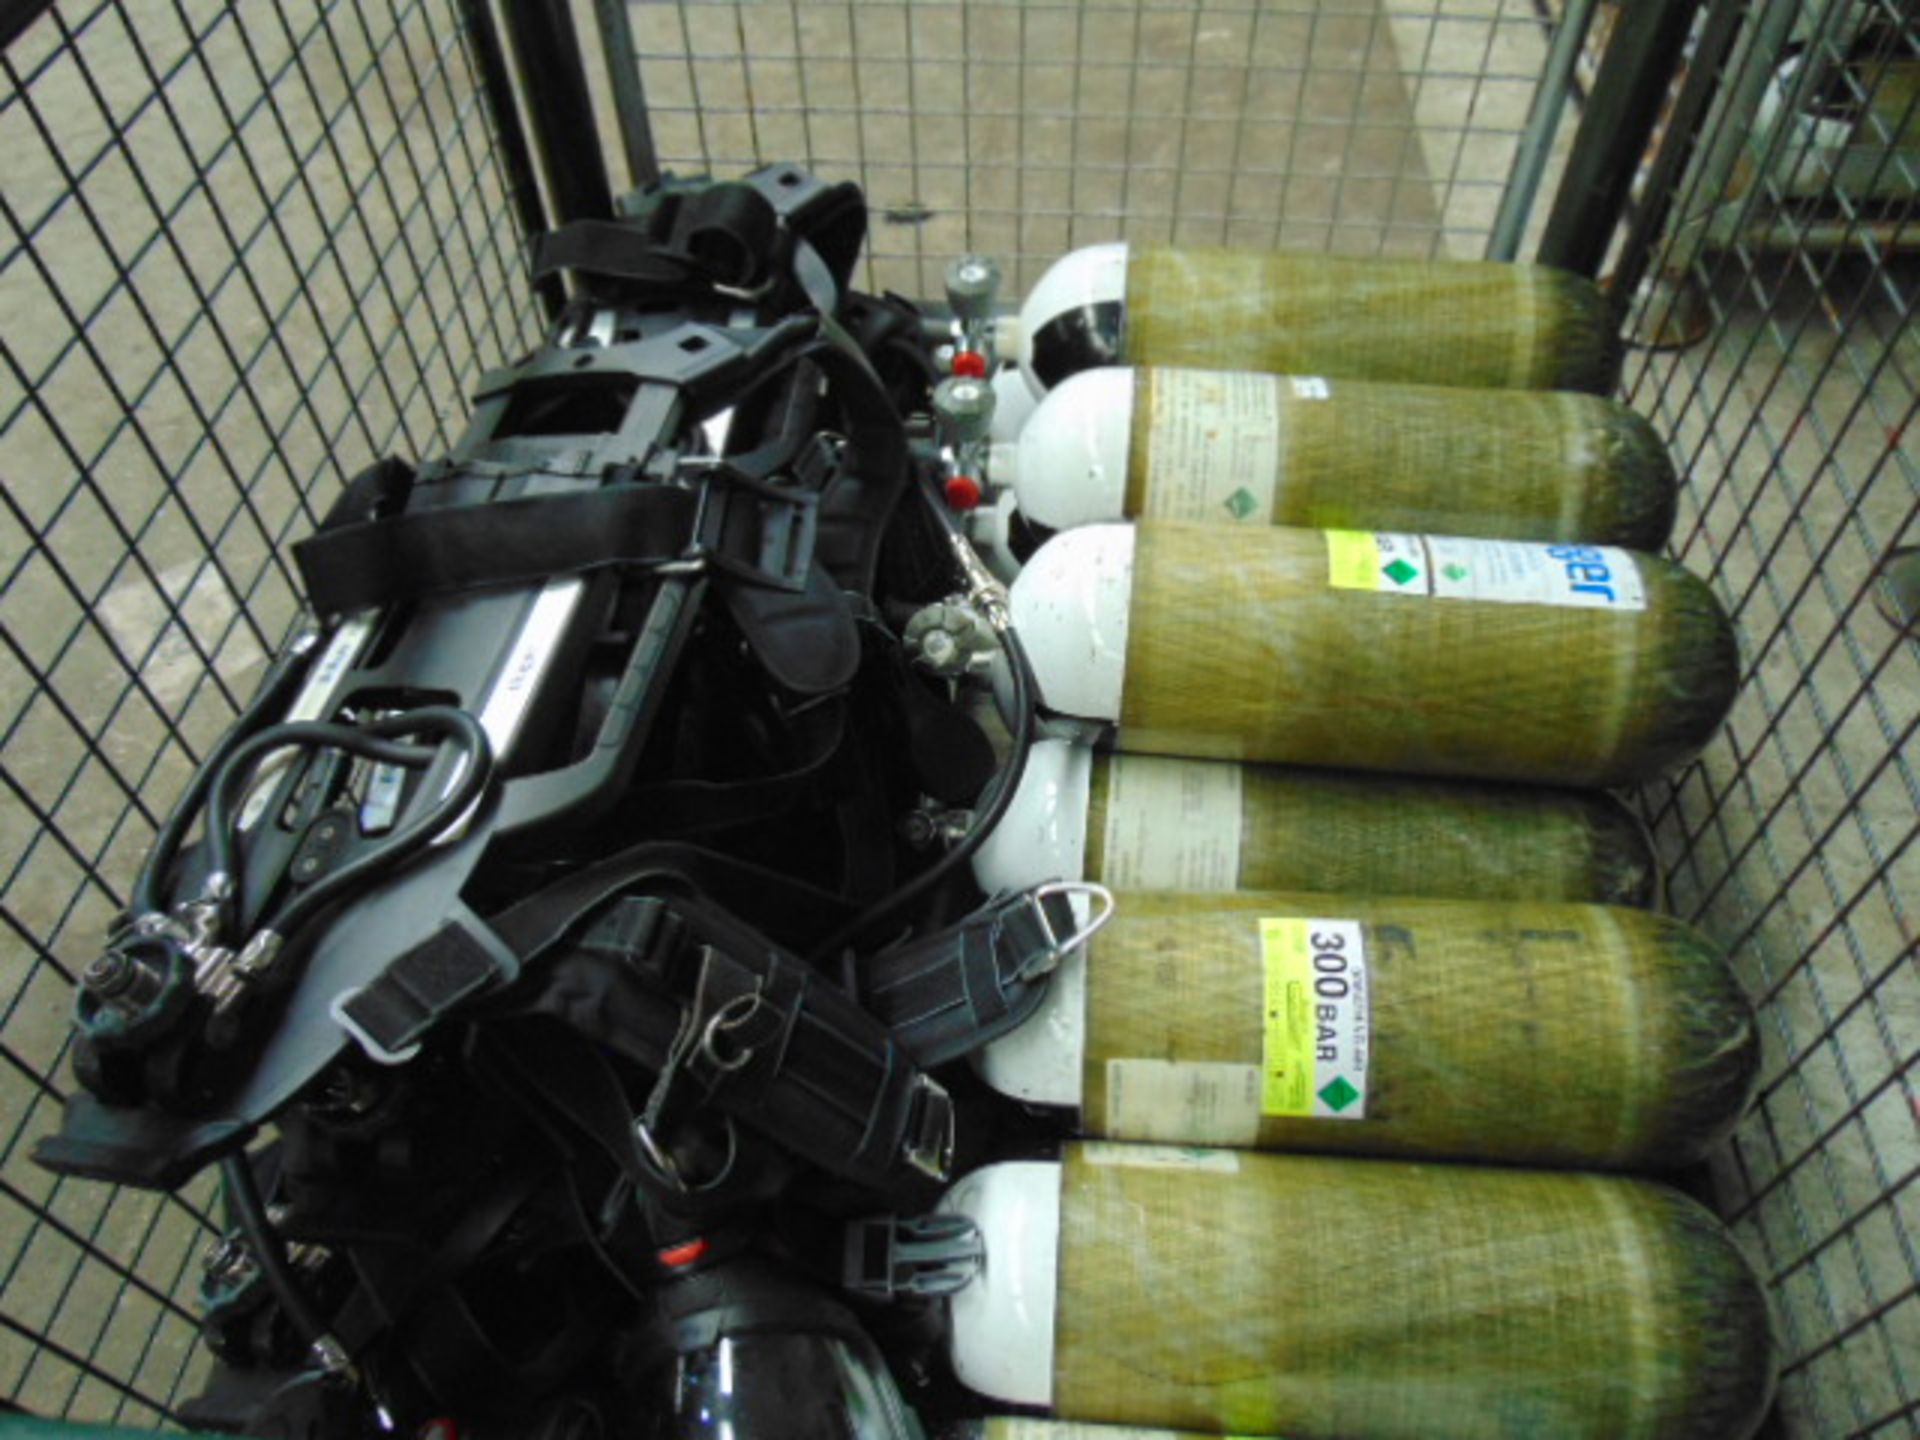 5 x Drager PSS 7000 Self Contained Breathing Apparatus w/ 10 x Drager 300 Bar Air Cylinders - Image 24 of 28